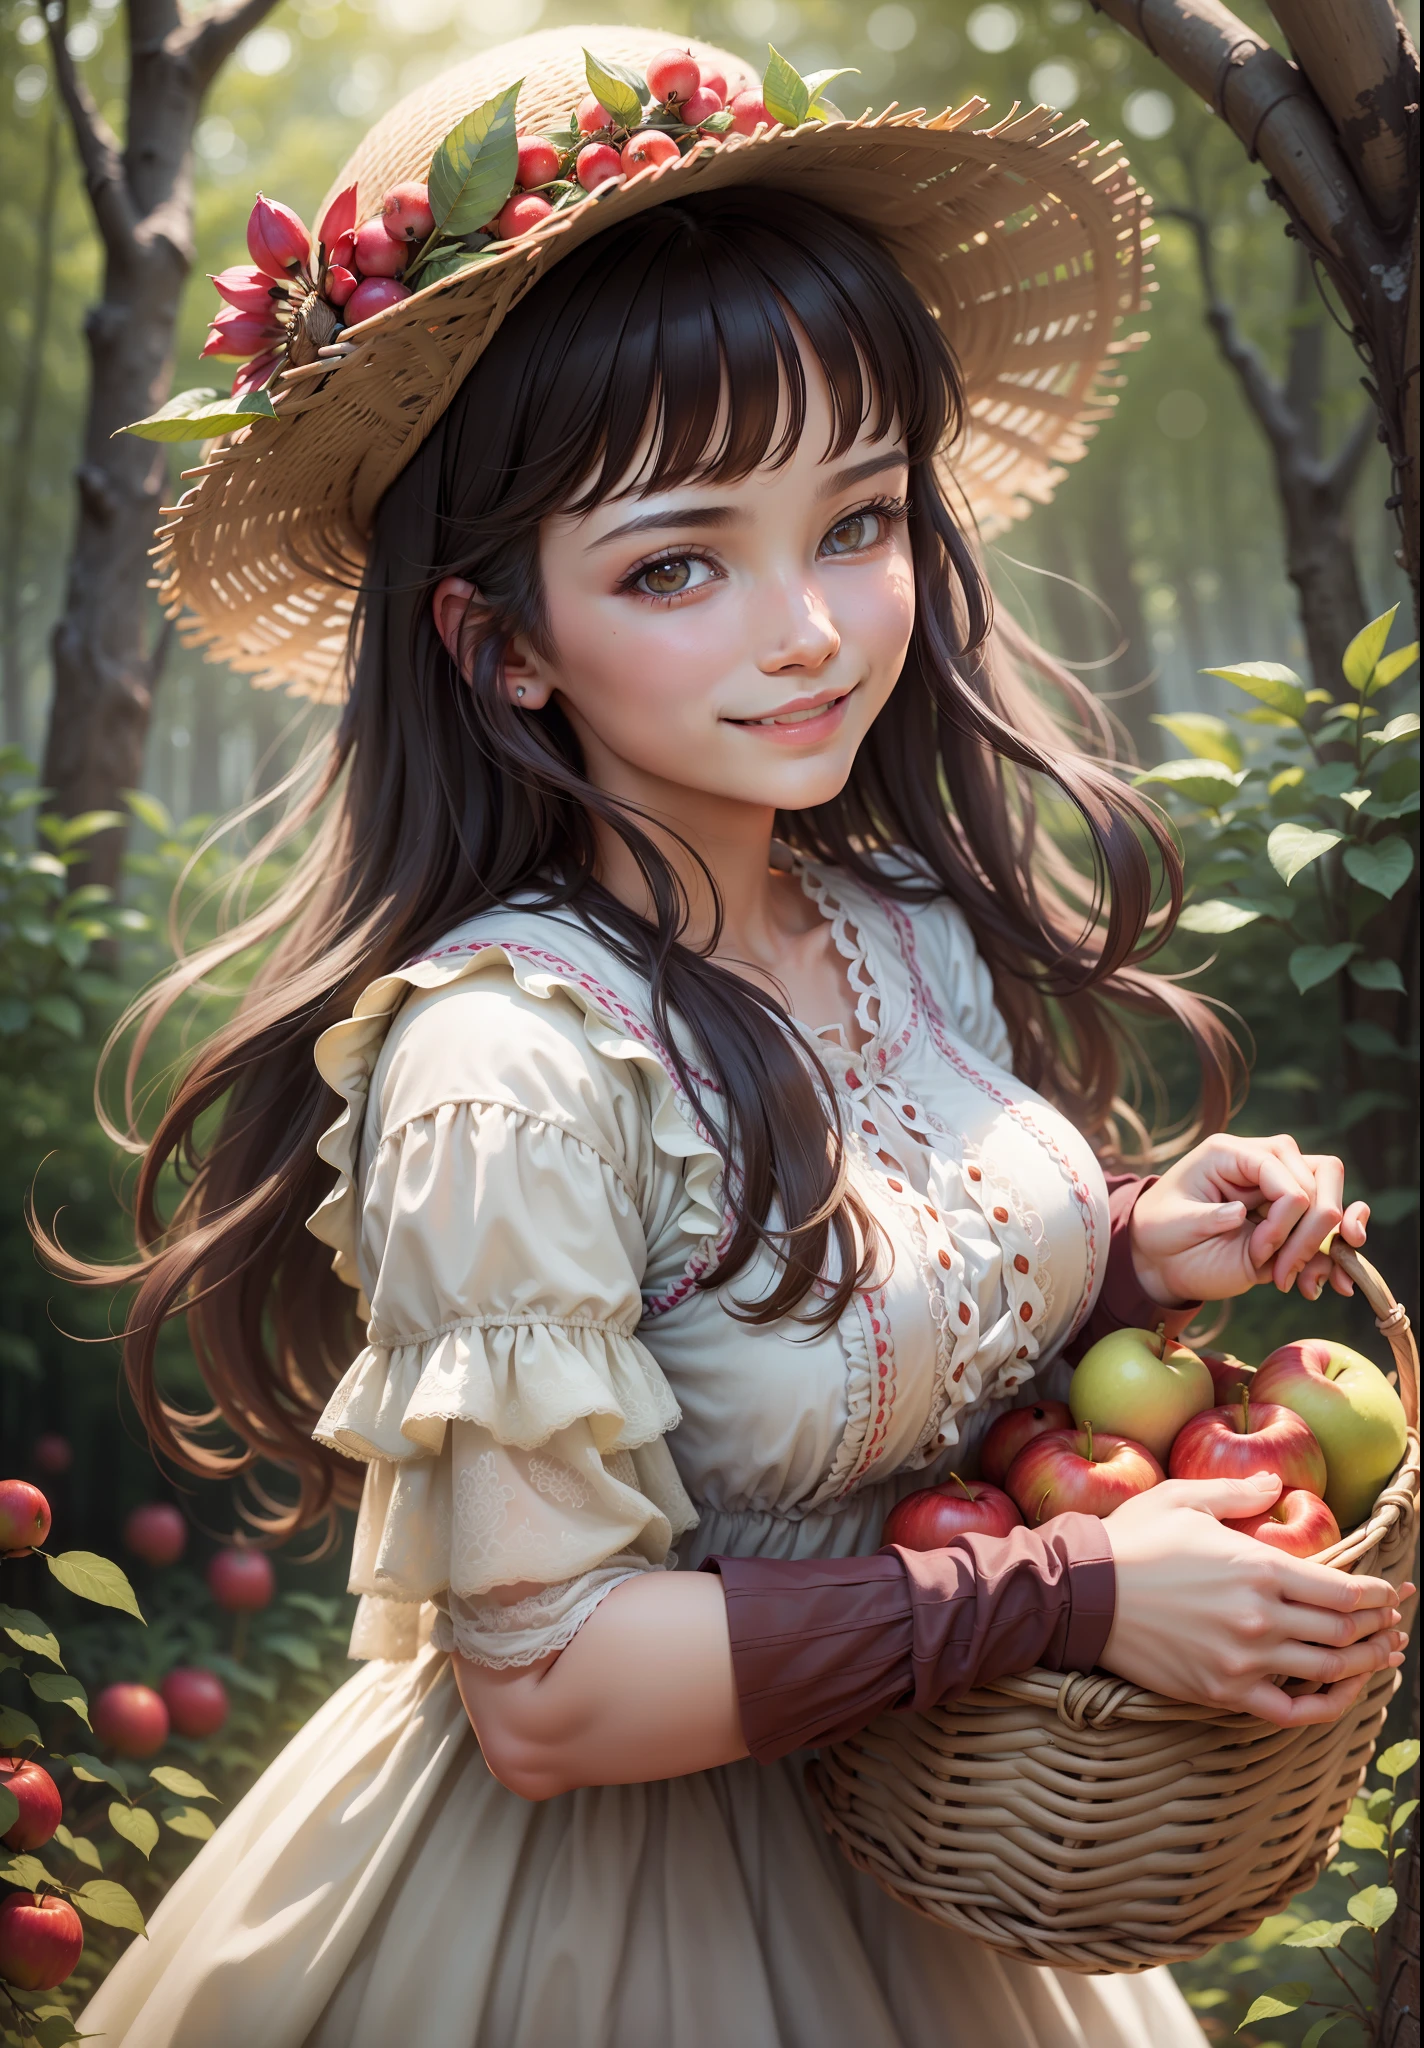 "((best quality)), ultra-detailed, close-up on Beautiful peasant girl, floral dress, smiling, in a forest, holding a basket of apples, soft lighting, bokeh effect, cool and cozy weather"